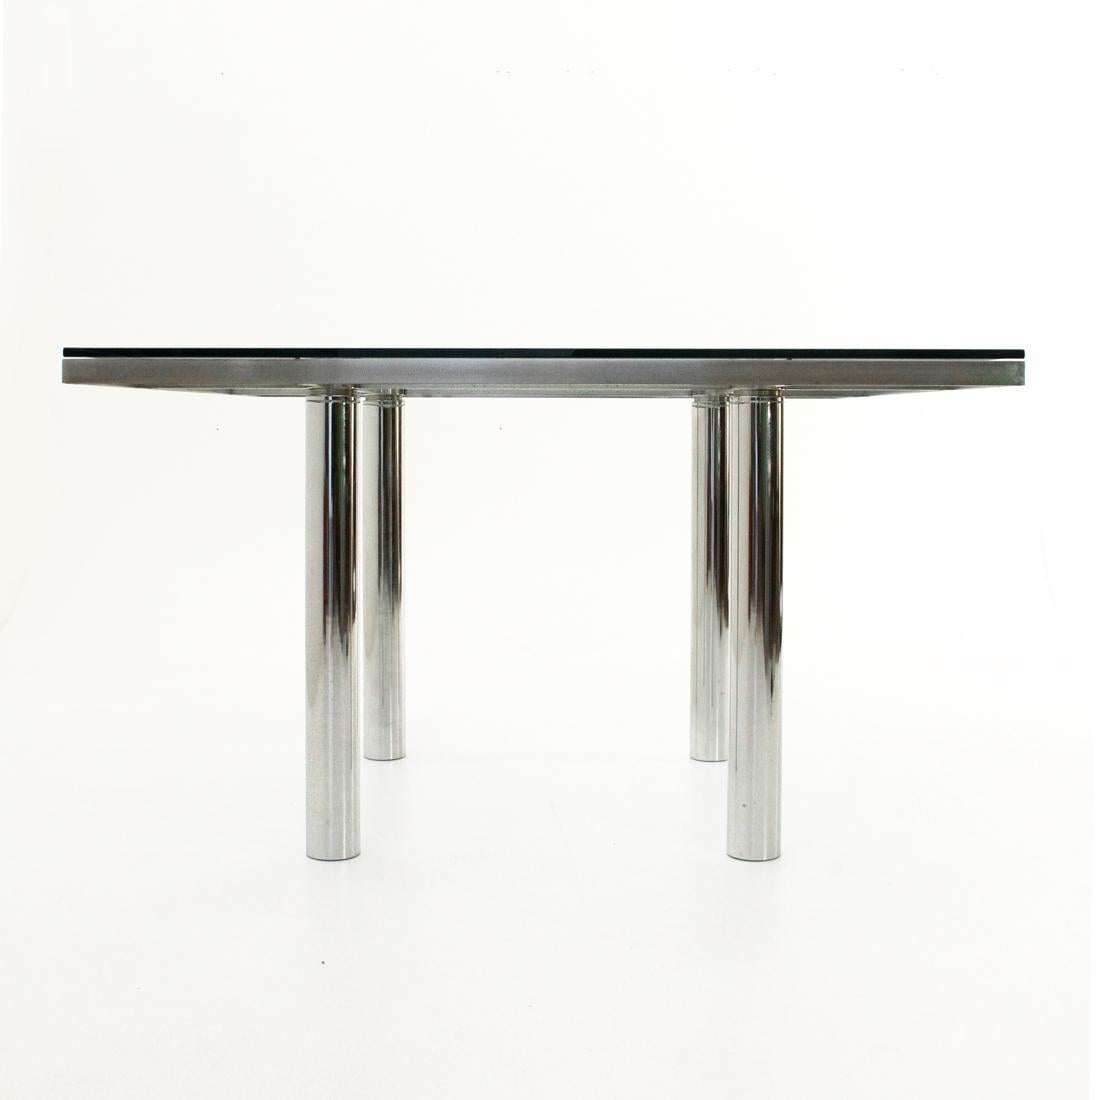 Table designed by Tobia Scarpa and produced by Gavina in the 1960s.
Chromed metal legs with leather foot.
Brushed steel top with leather inserts.
Transparent glass thick.
Structure in good general conditions, some signs due to normal use over